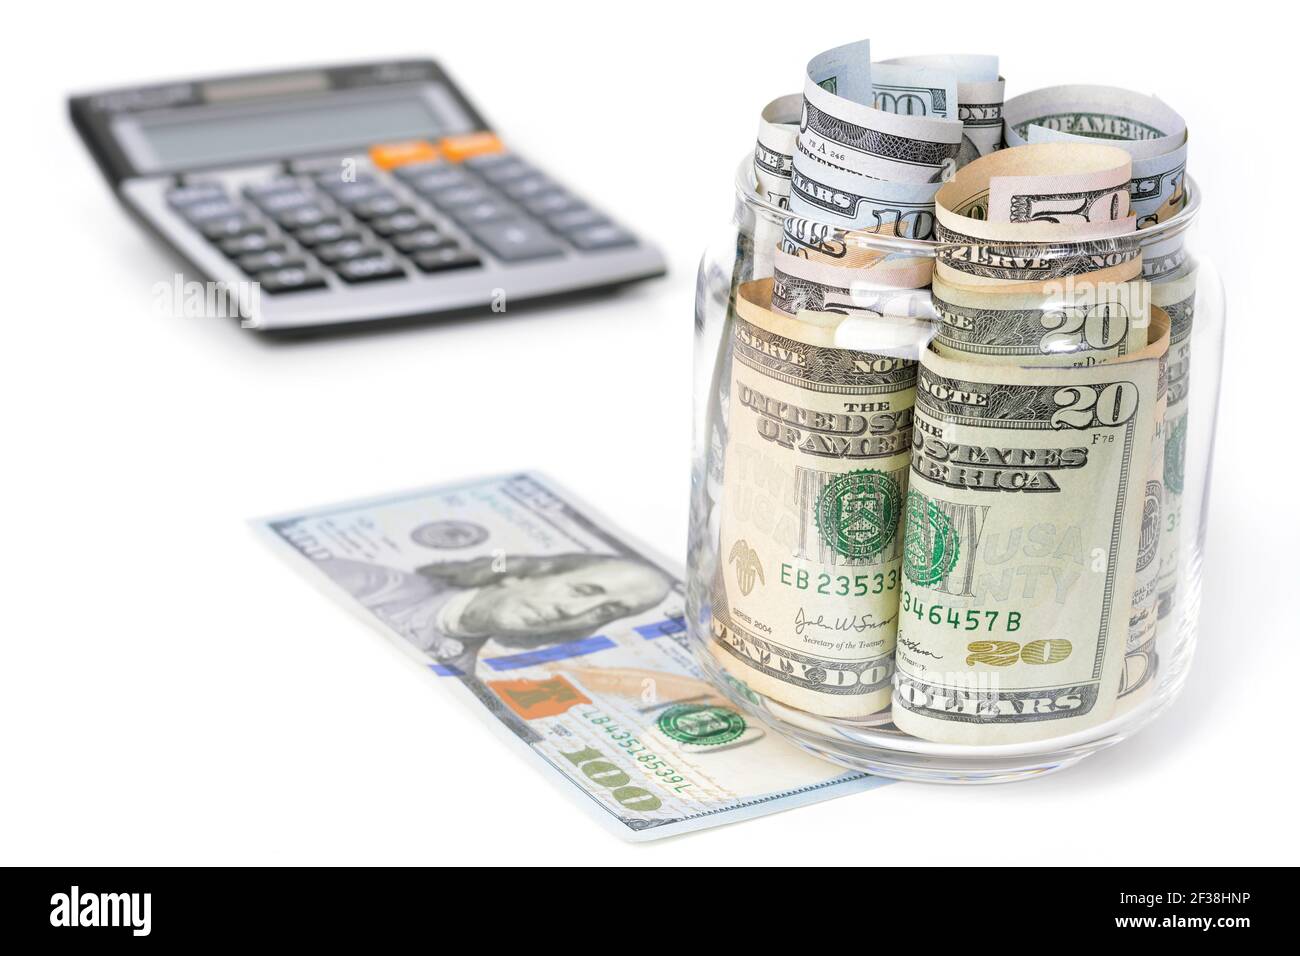 Money, US dollar bills, with calculator on white table - financial and accounting concepts Stock Photo